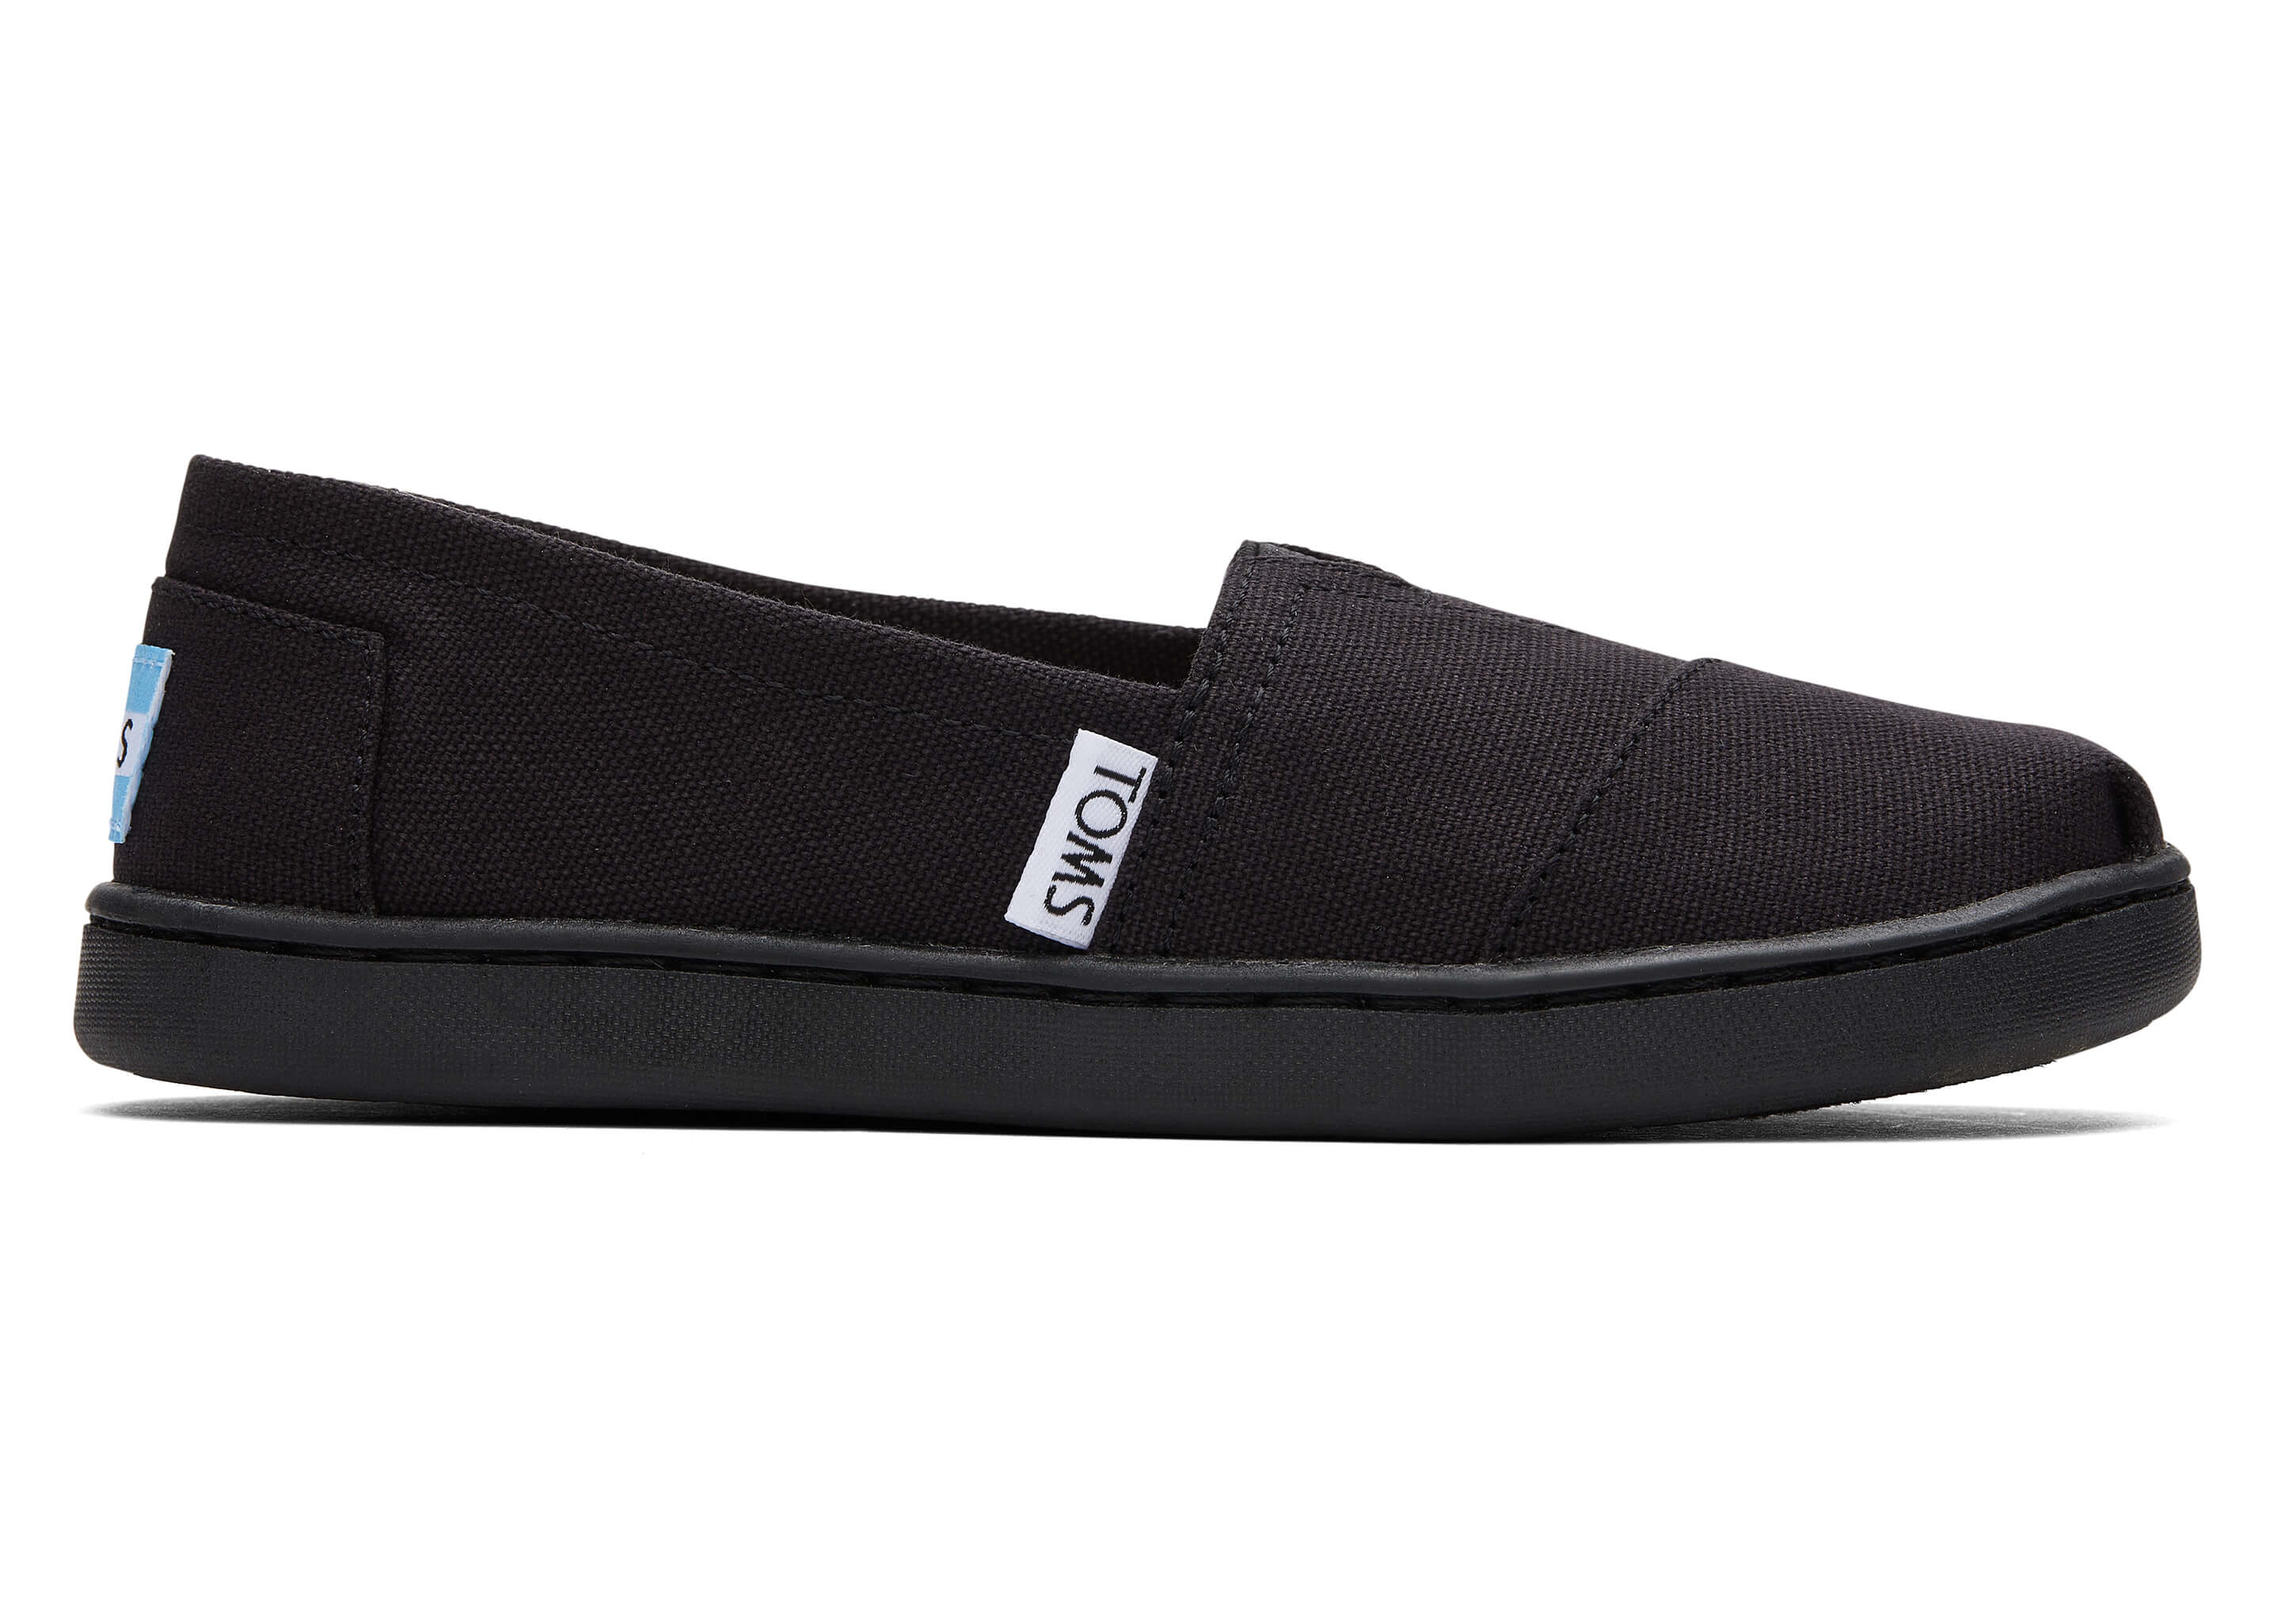 Details about   Toms Youth Classics Black Canvas Slip on Shoes Size Youth 1 New No Tags 